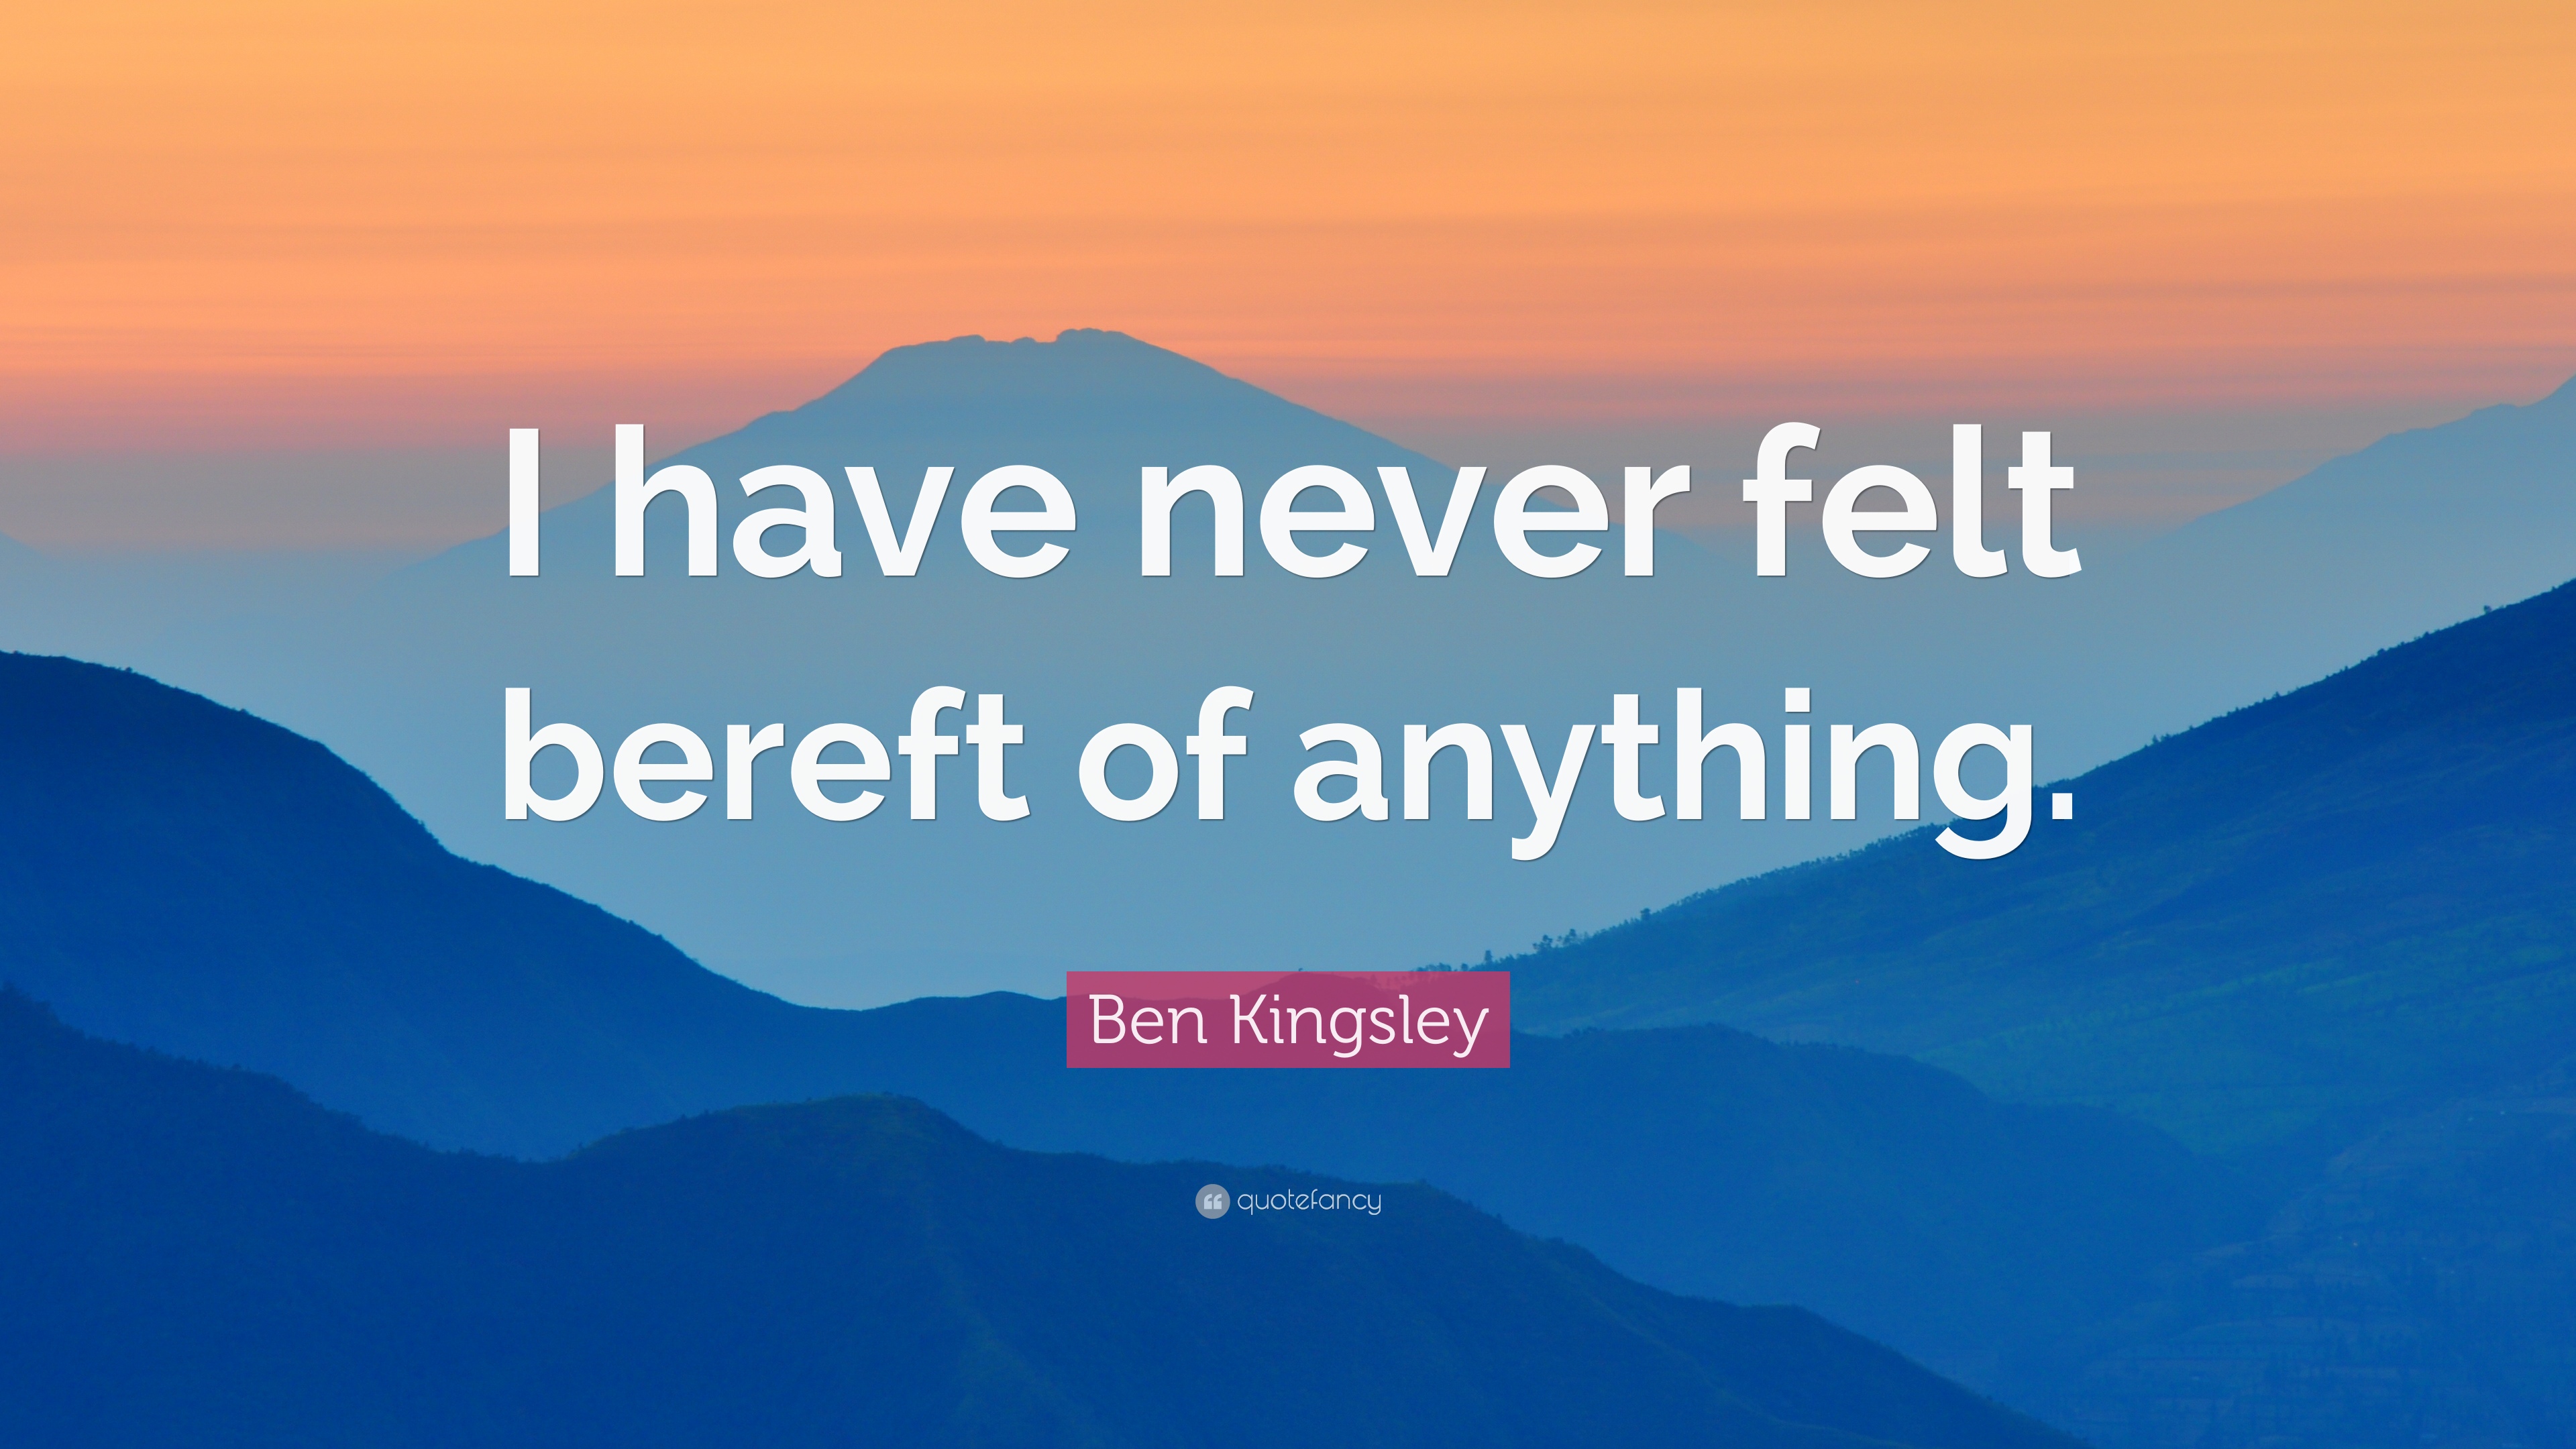 Ben Kingsley Quote: “I have never felt bereft of anything.” 7